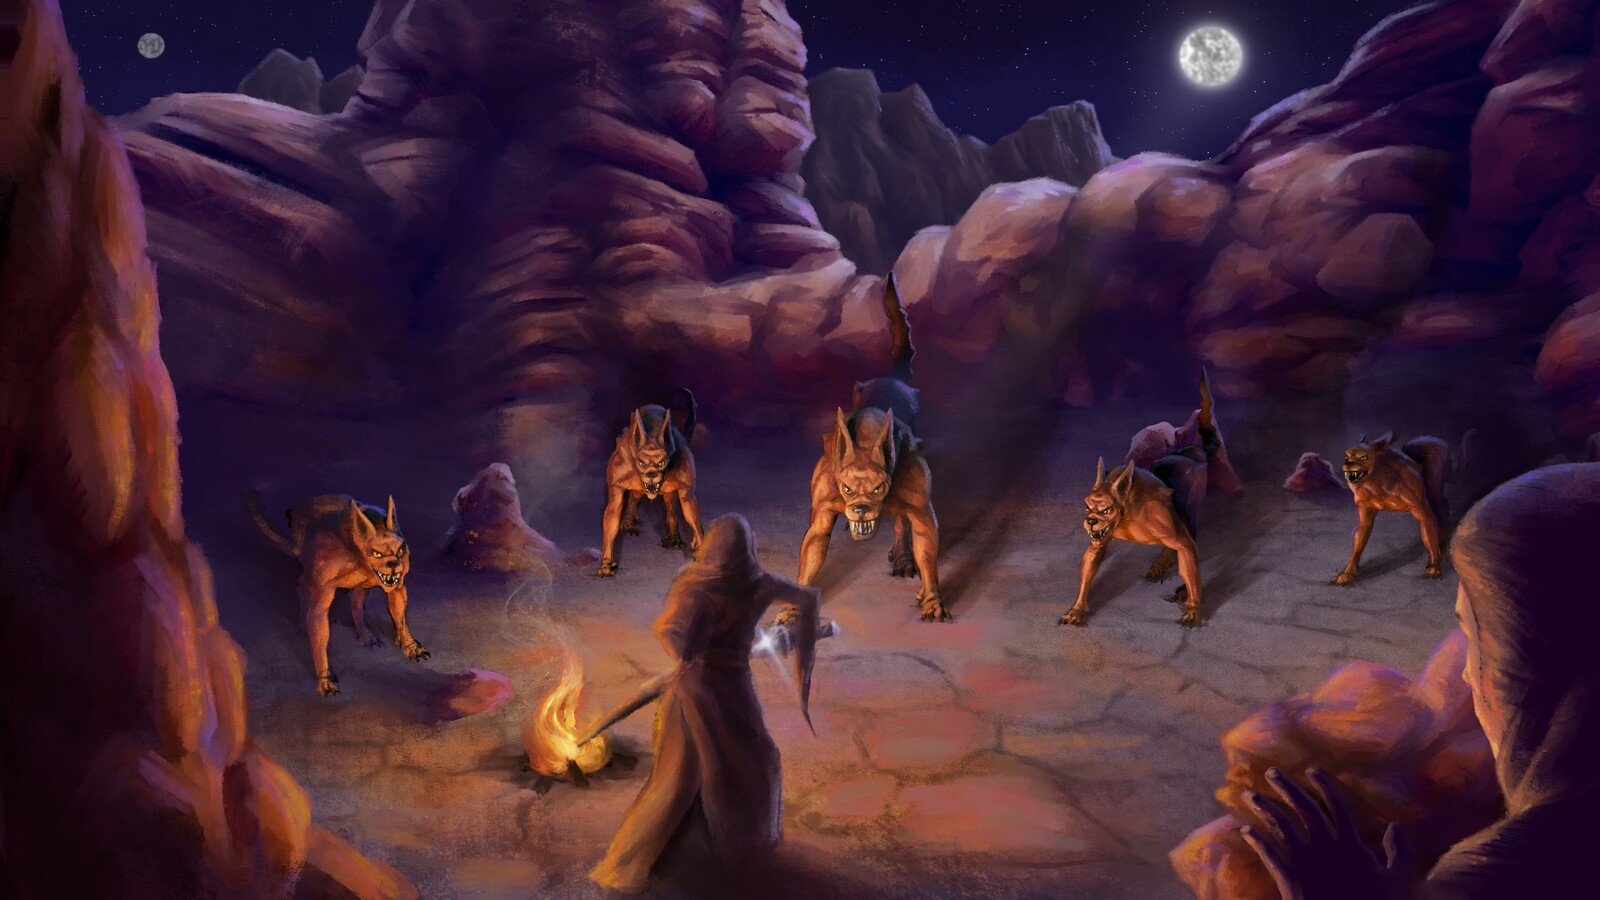 This one is a mix of 2D and 3D.
I used zbrush to sculpt the sand dogs and used it as a base for the painting.